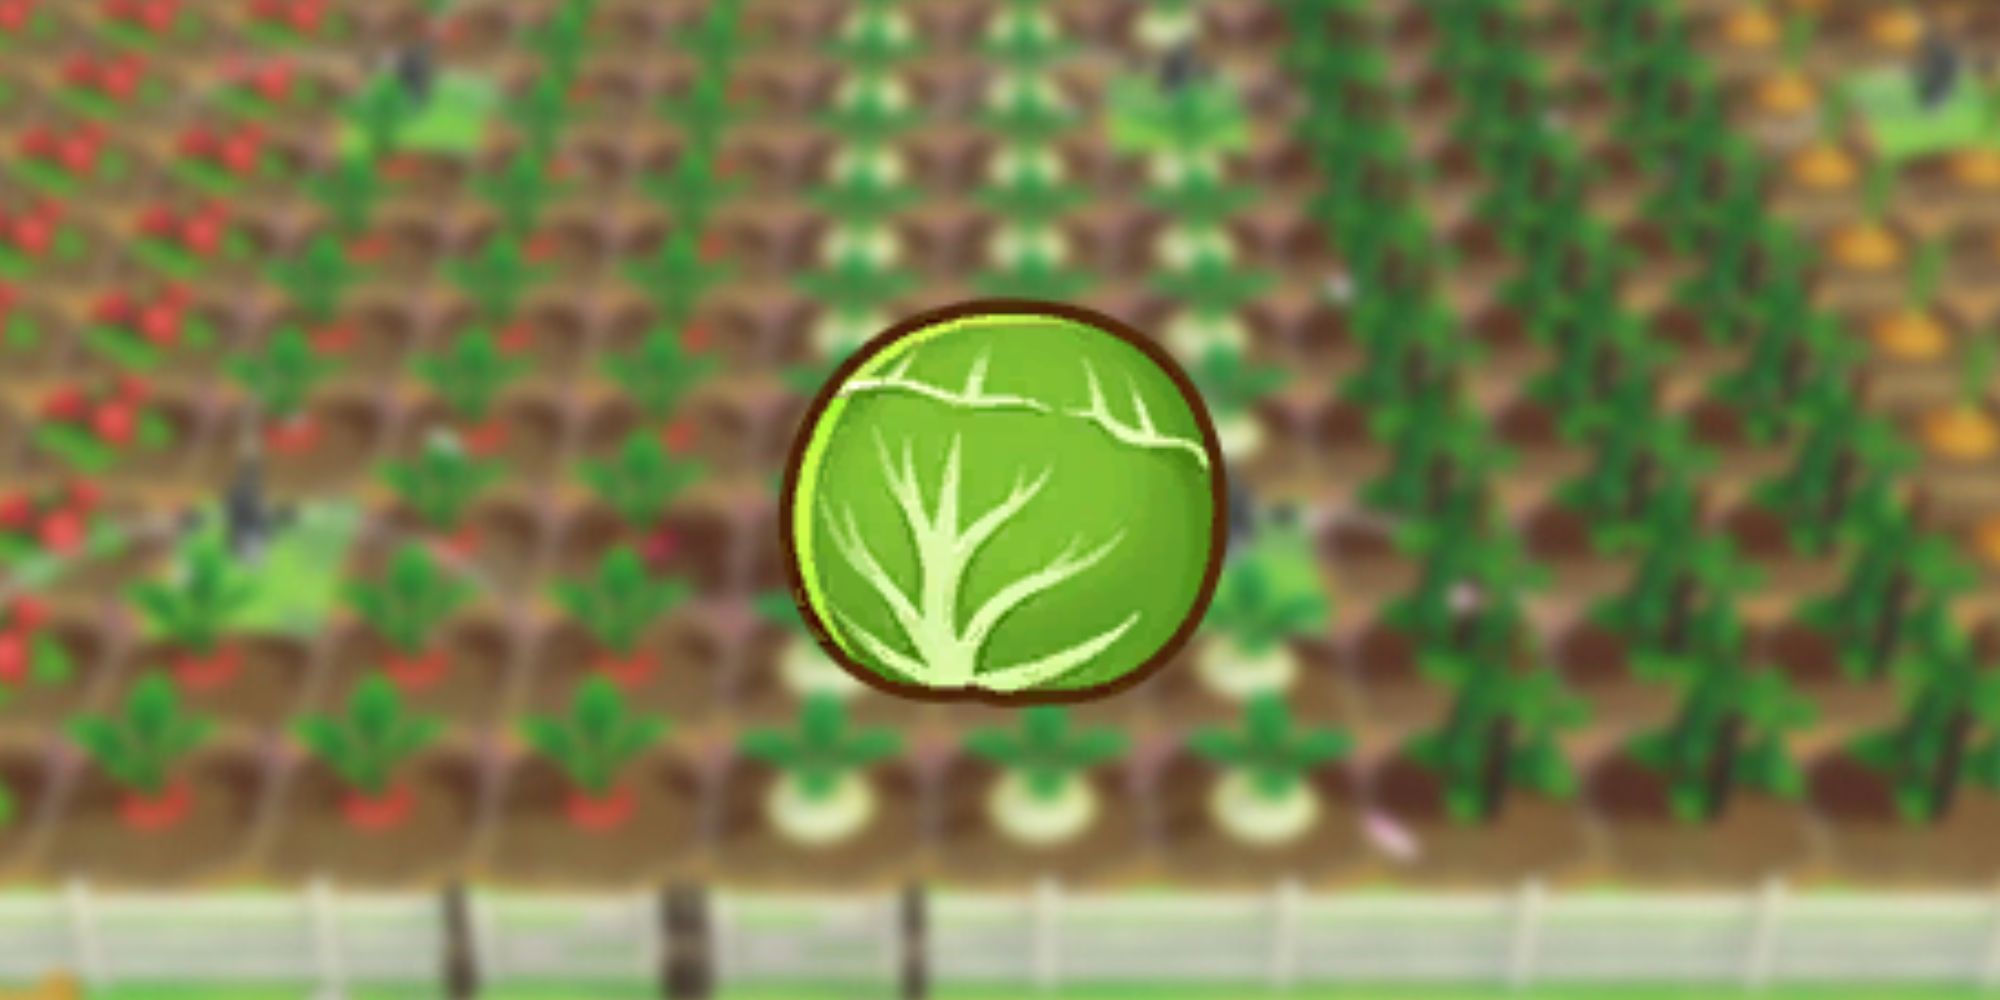 Cabbage icon as it would be seen in players inventory over blurred background of crops in game